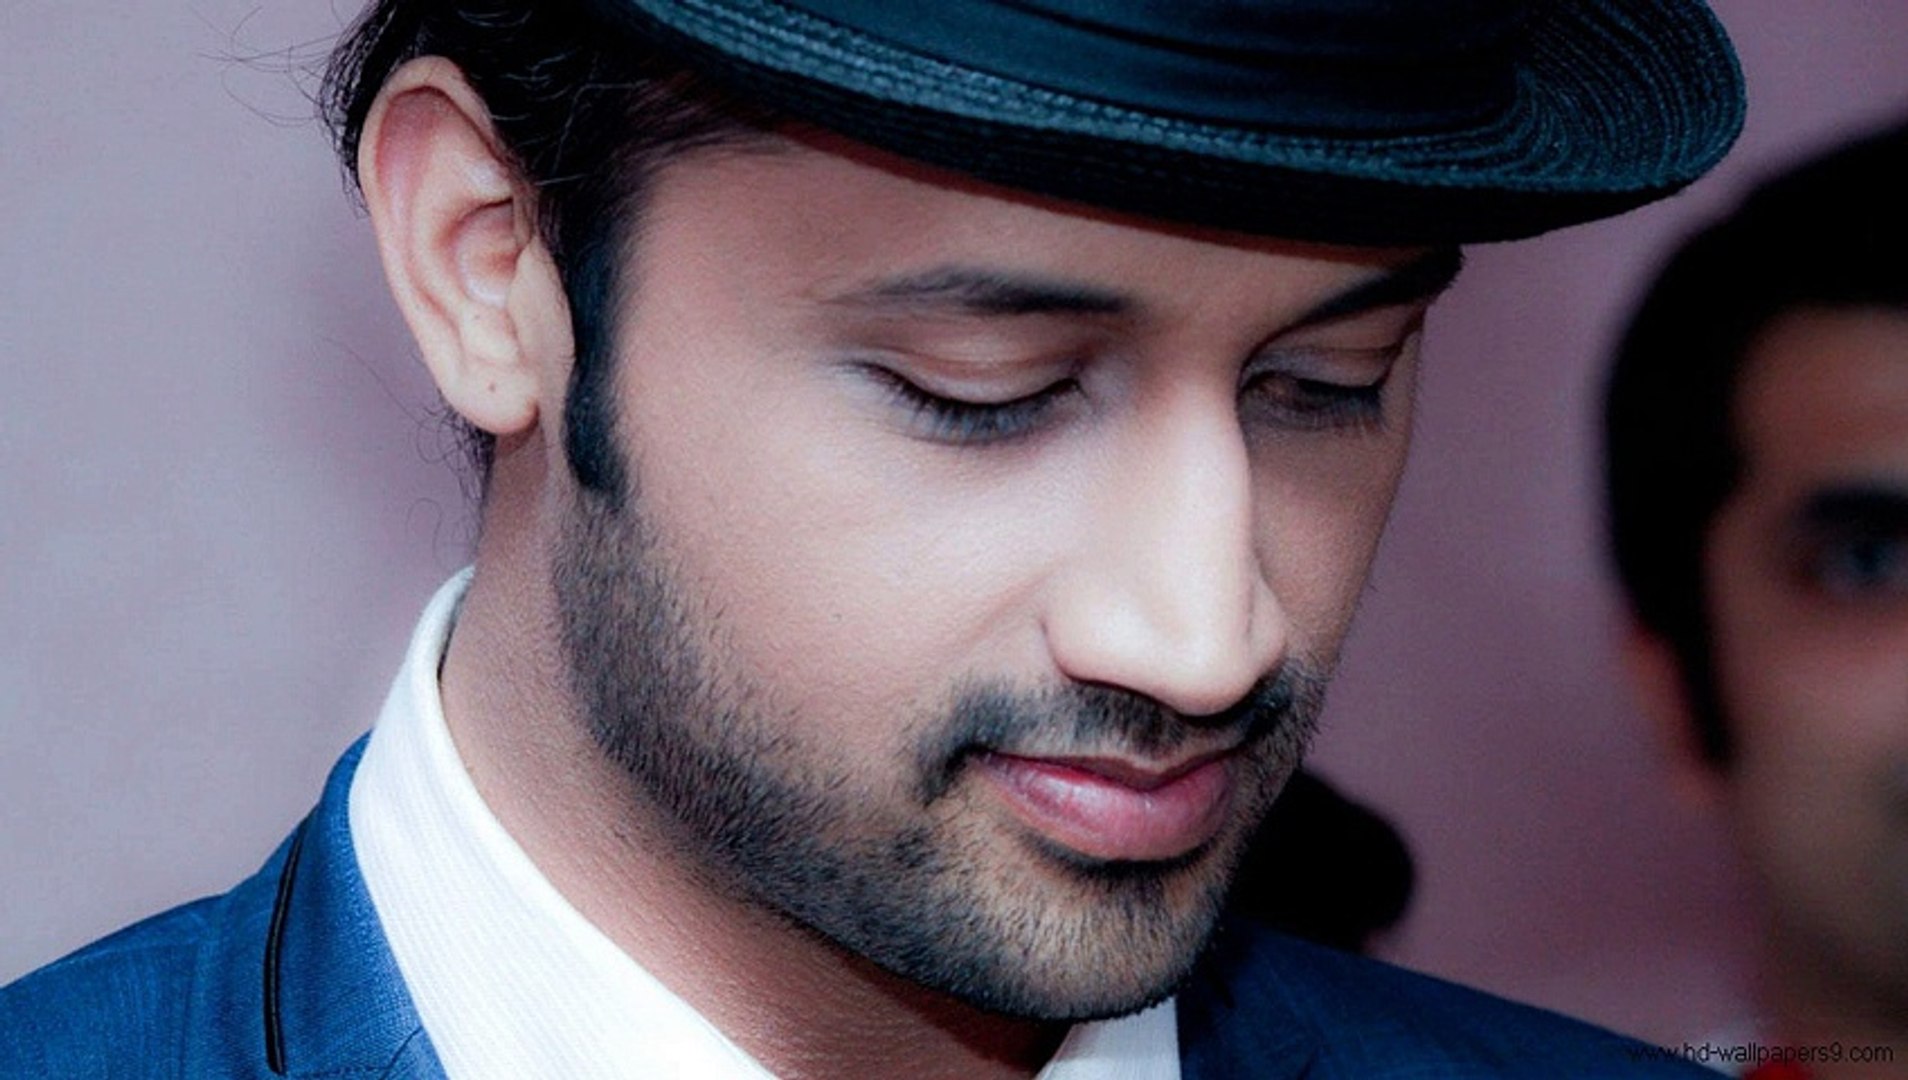 Atif Aslam New Song Ab Ajaao Of Upcoming Album 2015 -HD - video Dailymotion